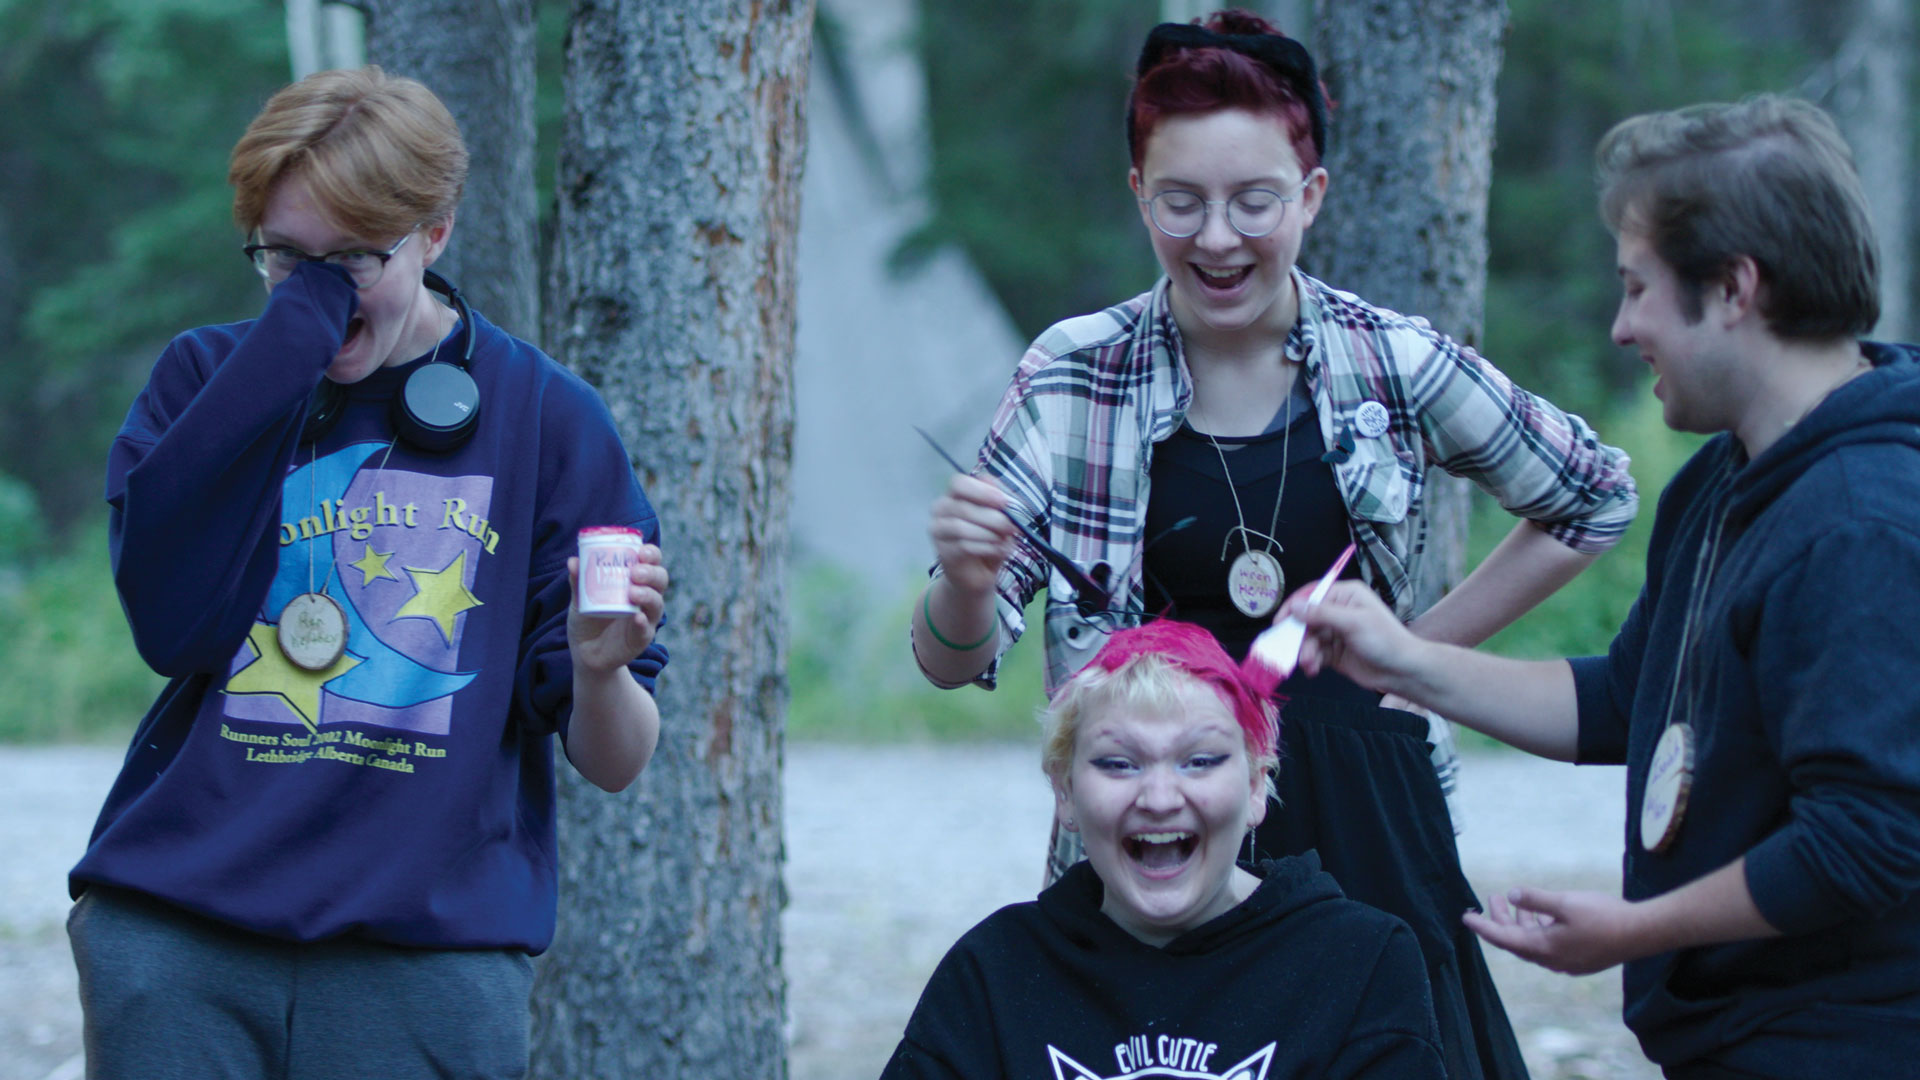 Summer Qamp film still featuring three youth dying another's hair and all happily laughing